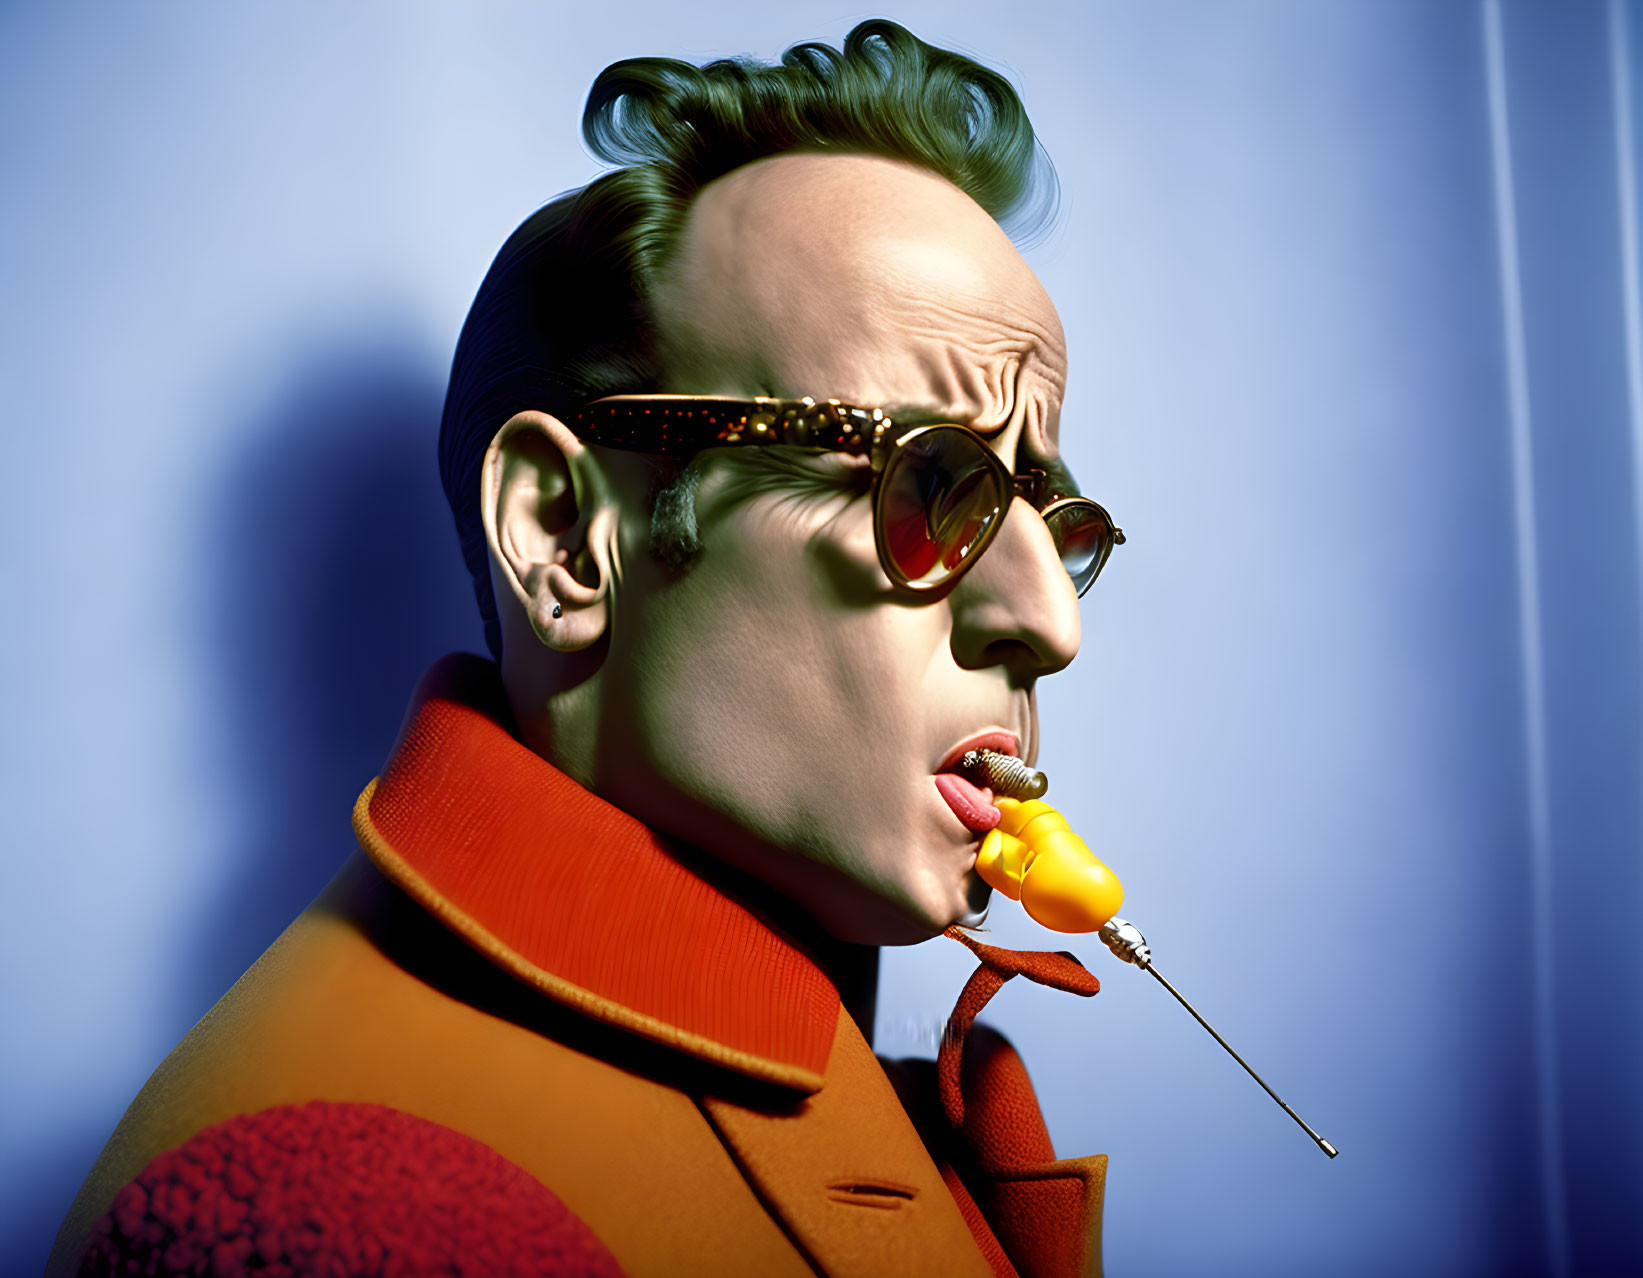 Man in Orange Jacket with Sunglasses and Smoking Pipe on Blue Background